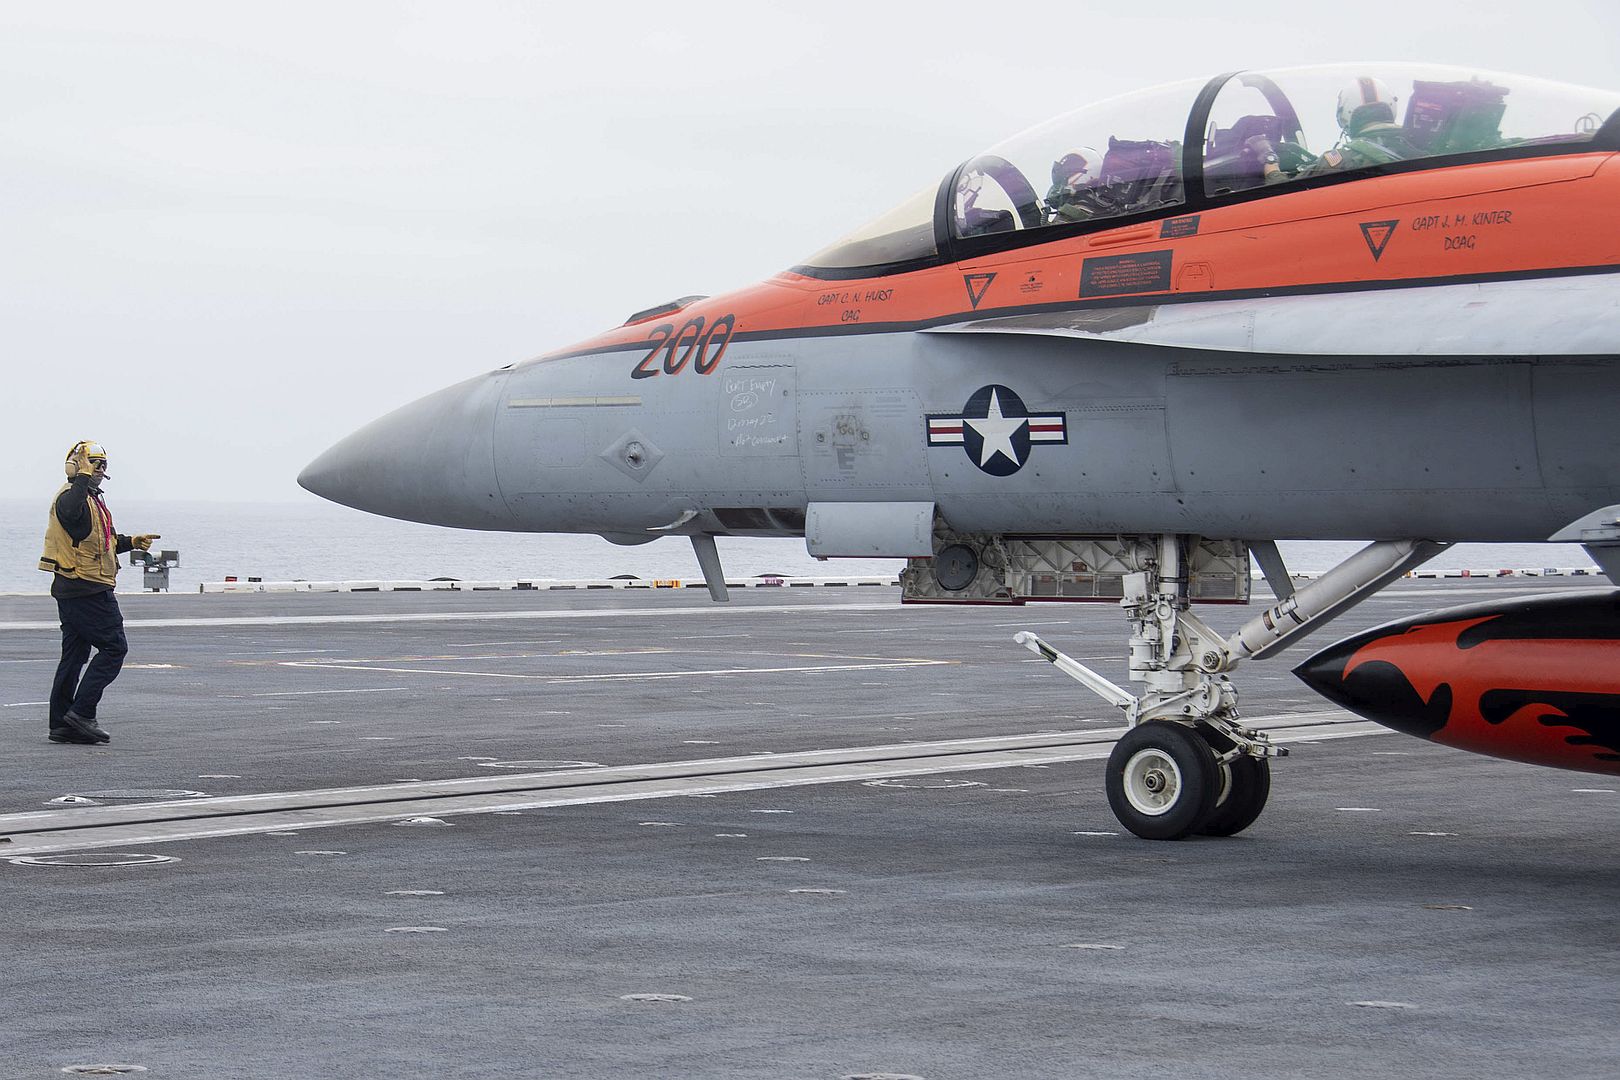 18F Super Hornet From The Mighty Shrikes Of Strike Fighter Squadron 94 Taxis On The Flight Deck Of The Aircraft Carrier USS Nimitz